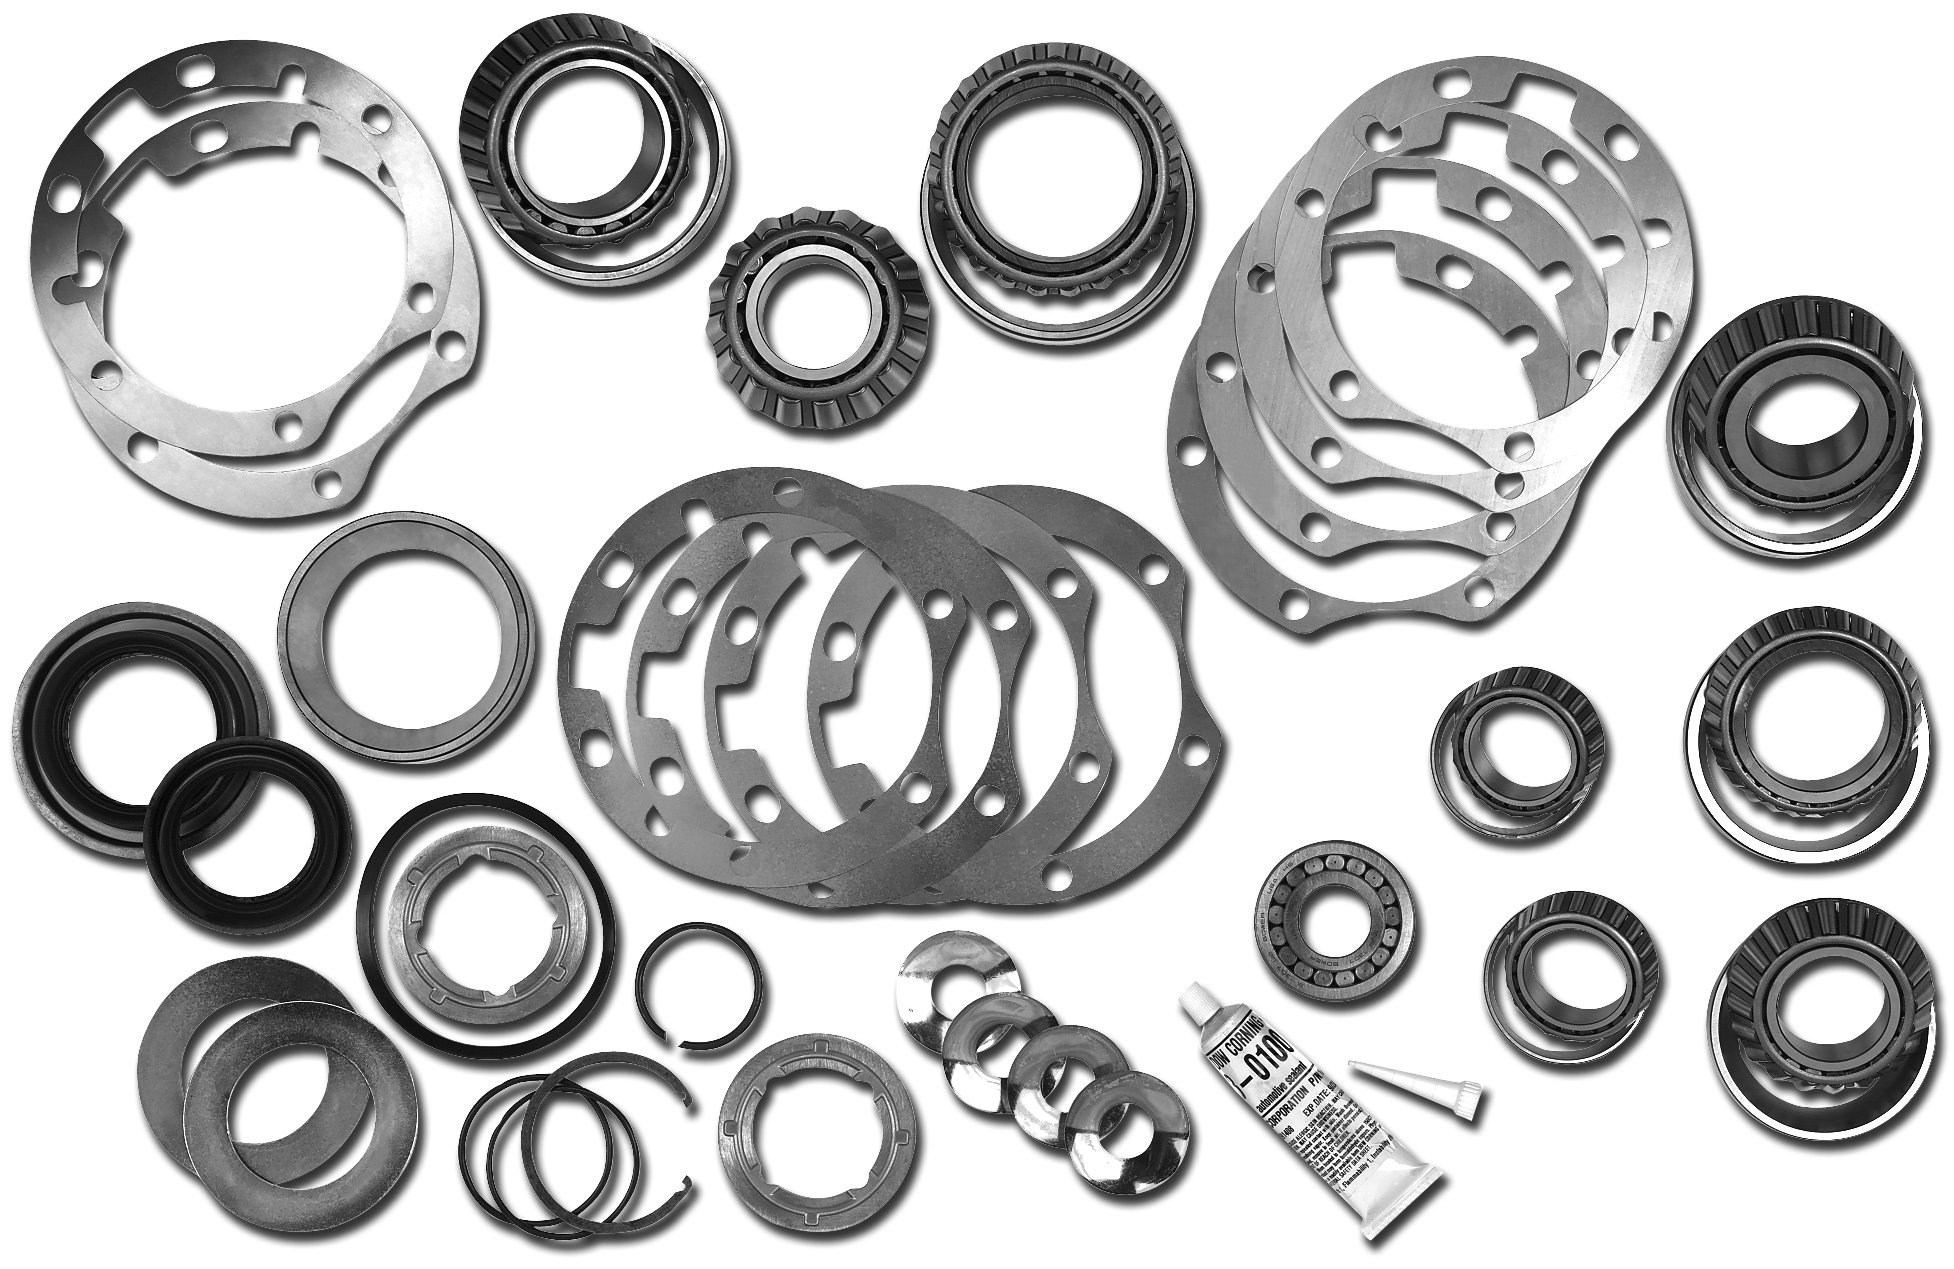 Dana Spicer 2017097 Differential Rebuild Kit for 03-06 Jeep Wrangler TJ &  Unlimited with Model 44 Front Axle & Rubicon Applications with Model 44  Rear Axle | Quadratec